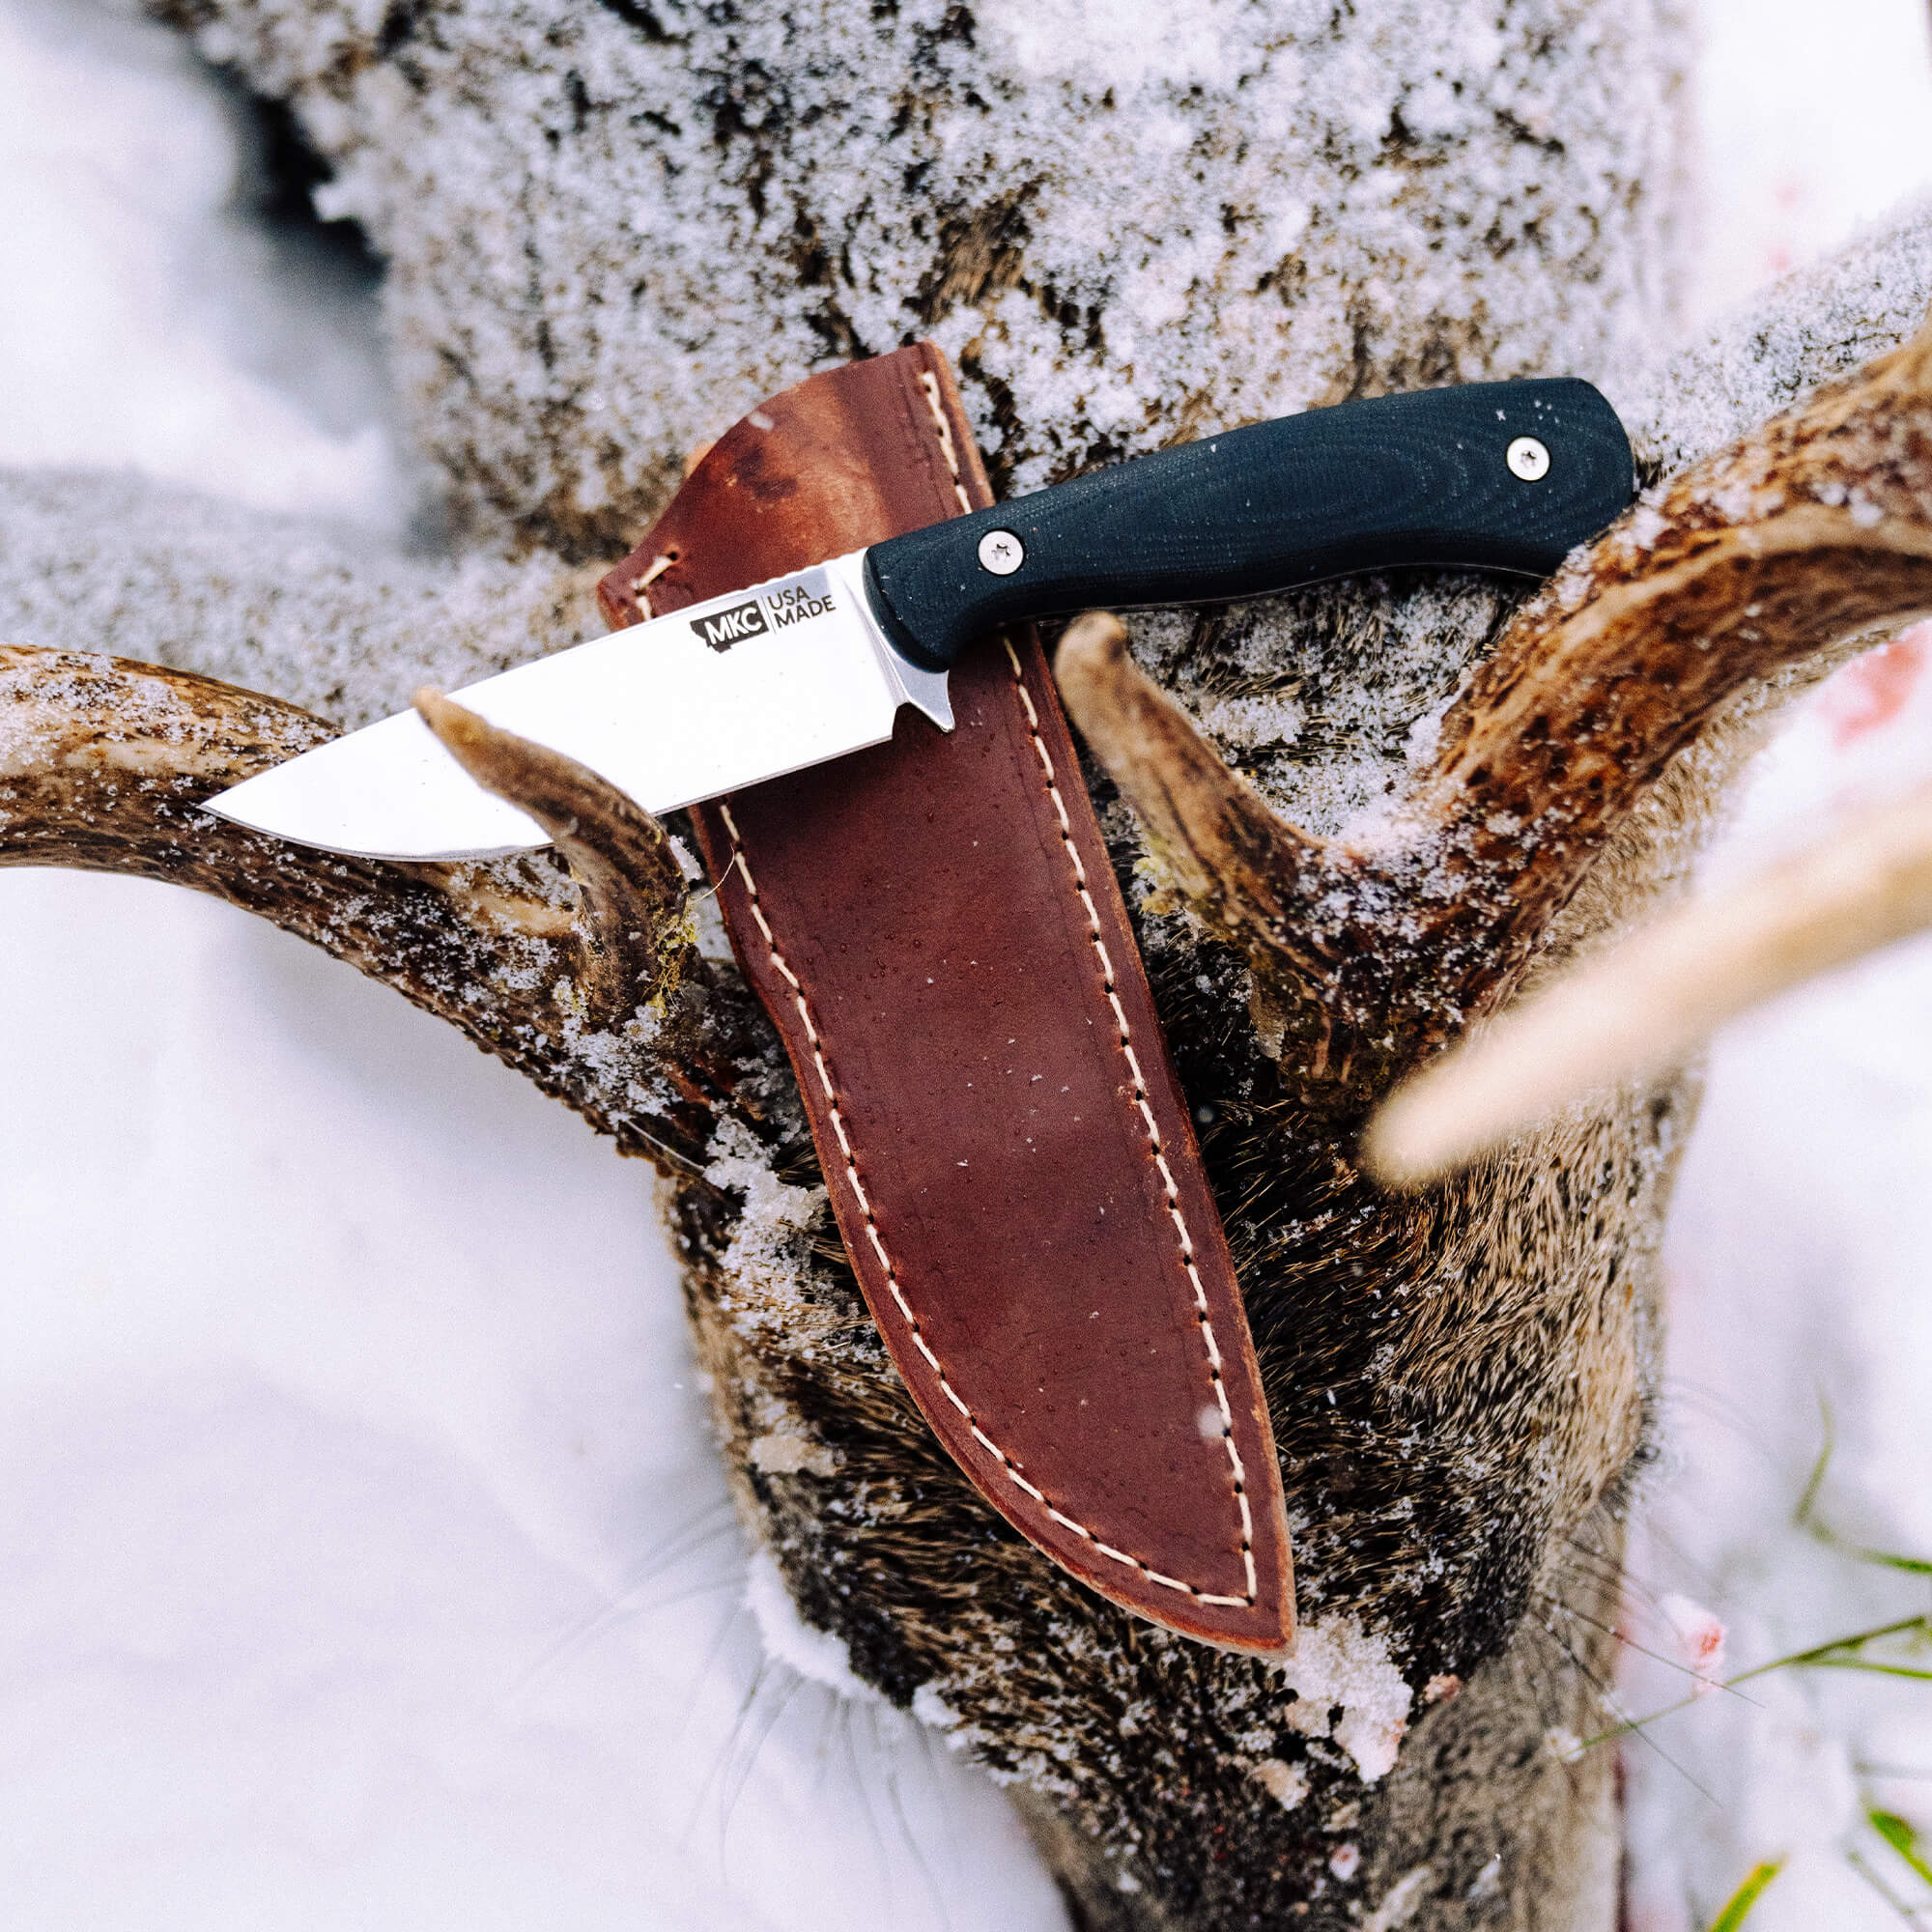 MKC WHITETAIL - VERTICAL LEATHER SHEATH